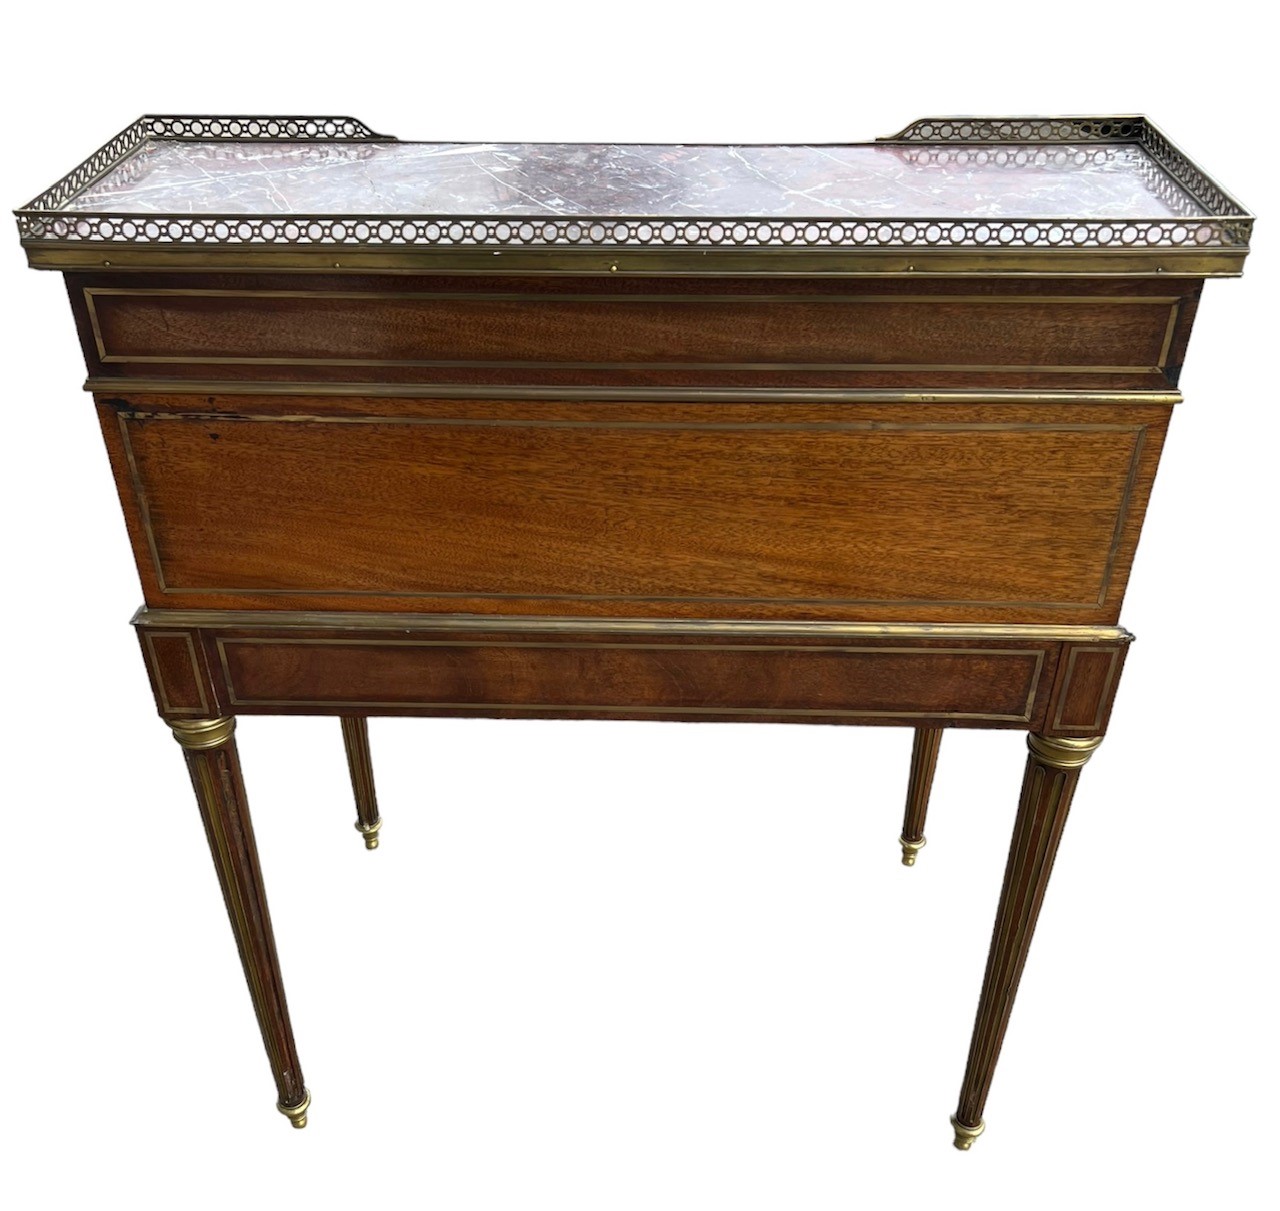 A 19TH CENTURY FRENCH LADIES’ MAHOGANY AND GILT METAL MOUNTED WRITING BUREAU DESK Having a - Image 8 of 9